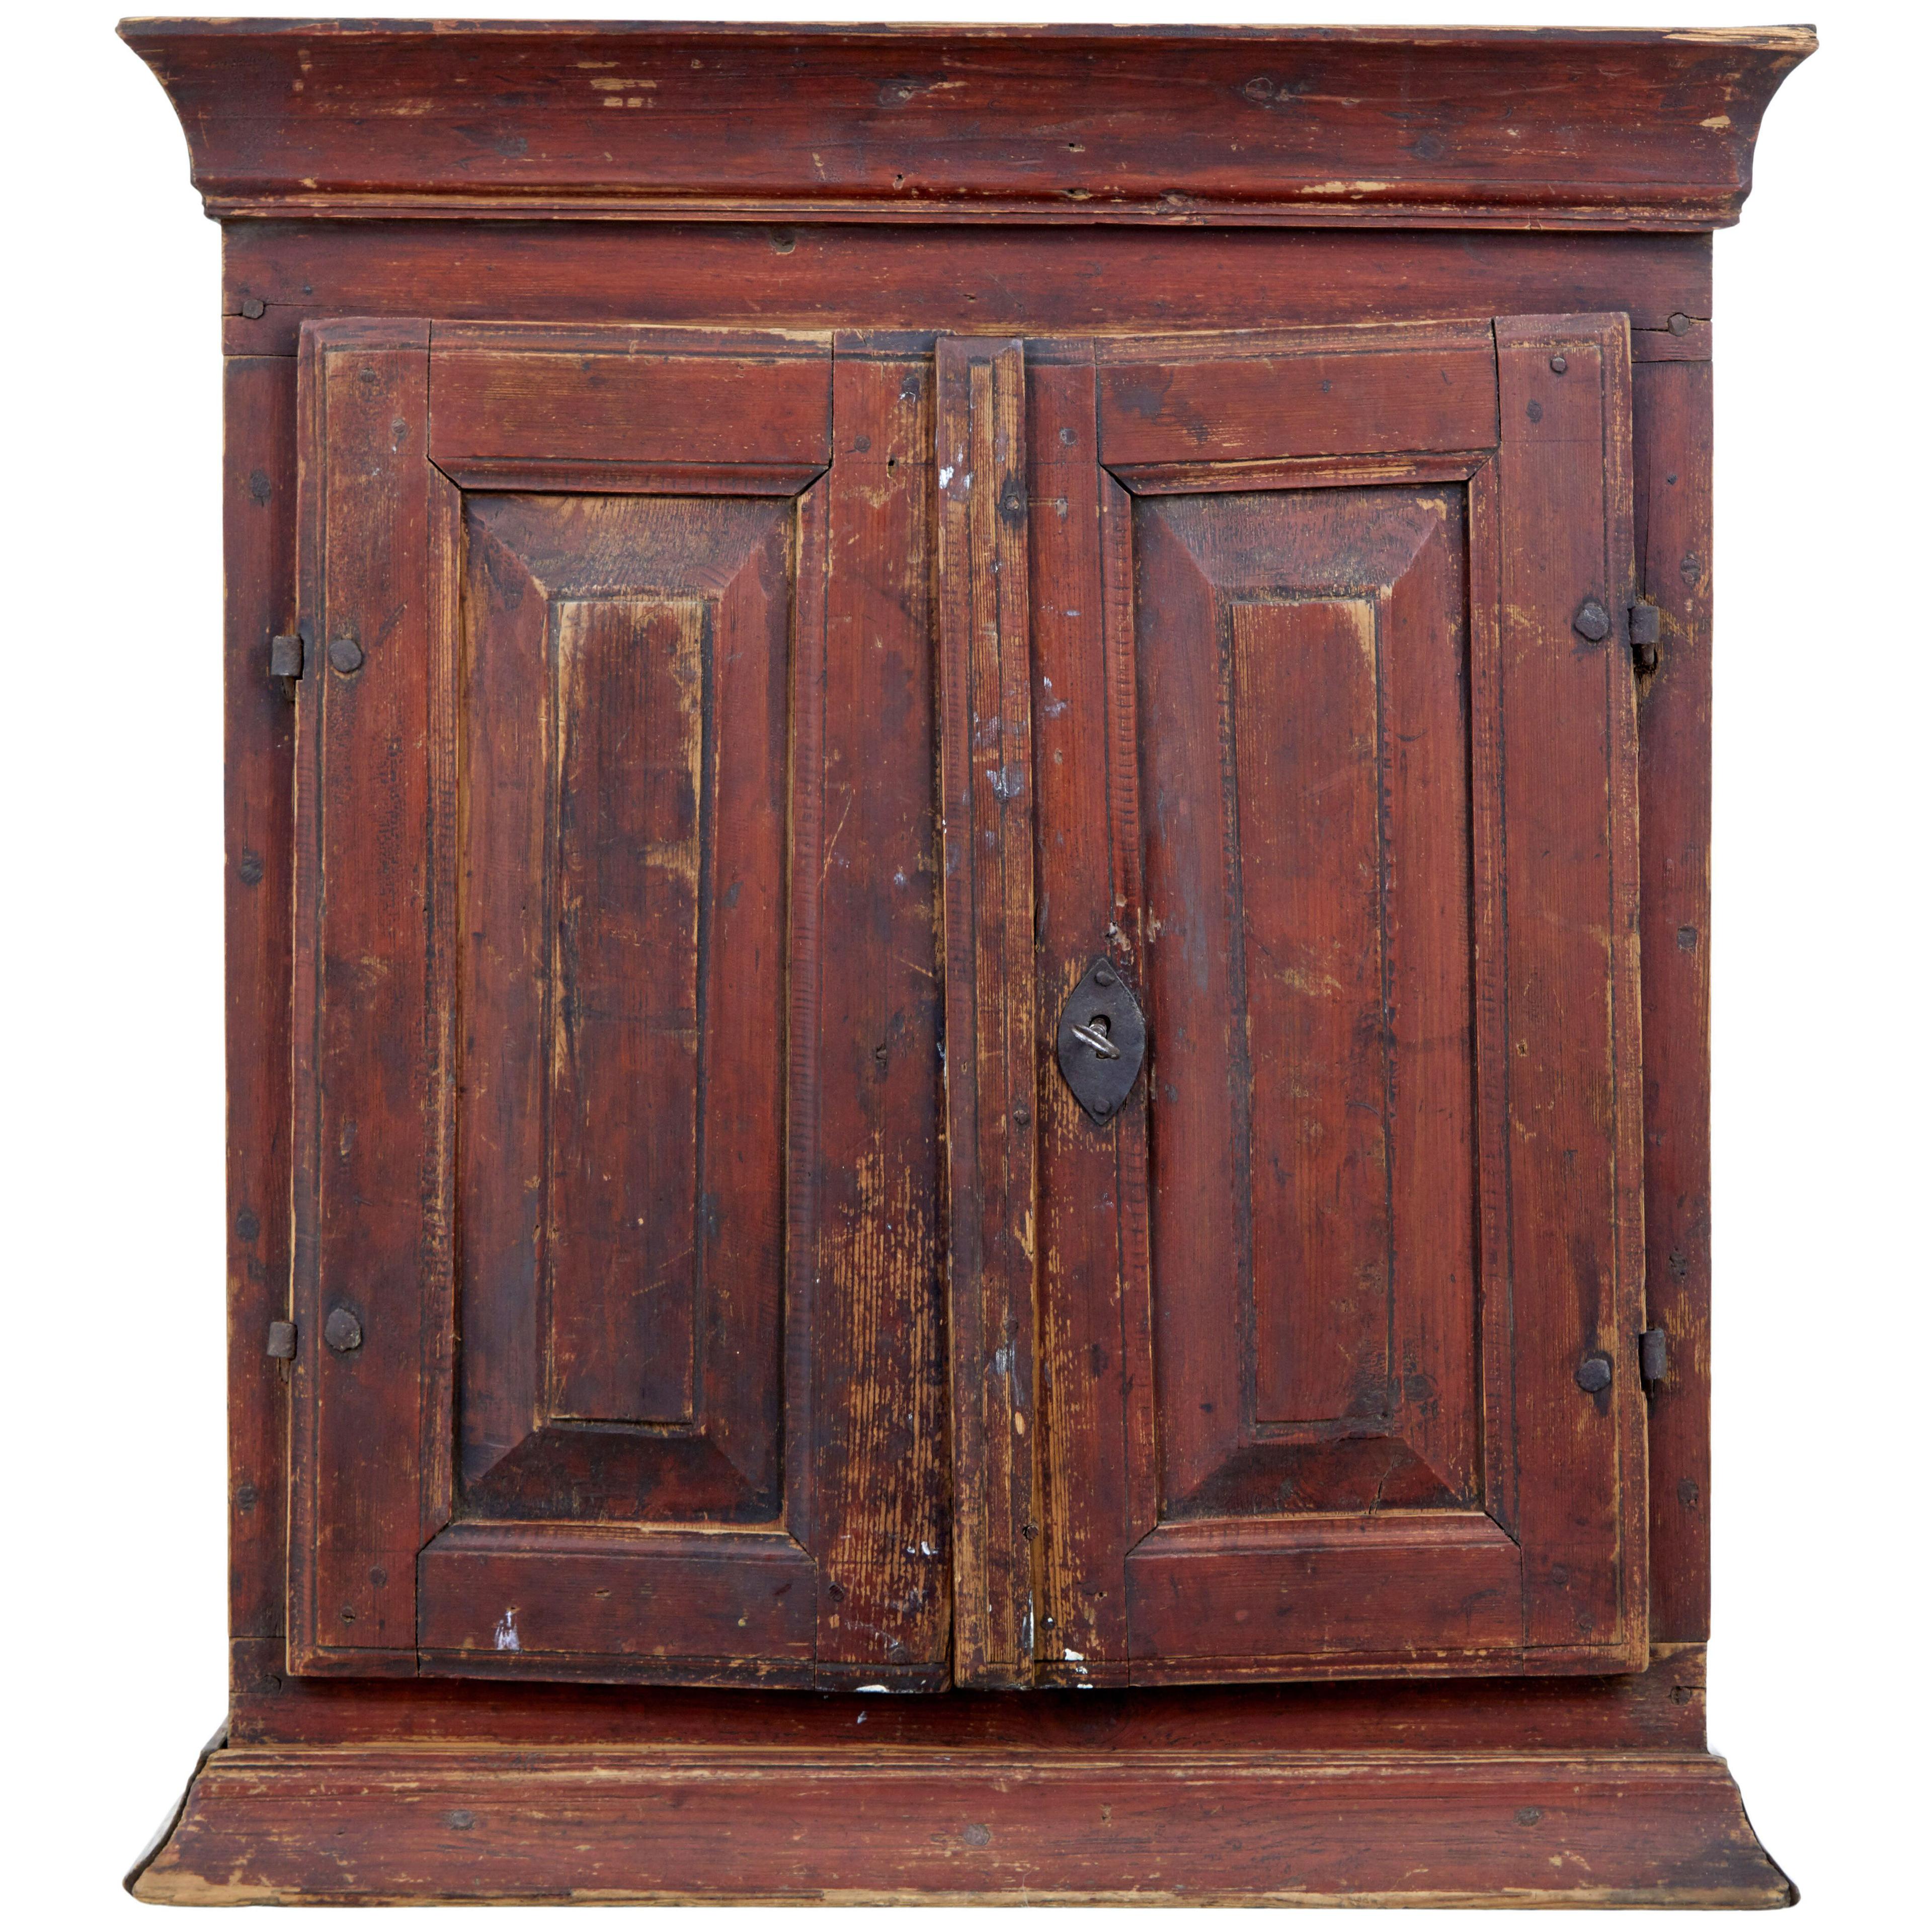 SWEDISH EARLY 19TH CENTURY PAINTED PINE WALL CUPBOARD